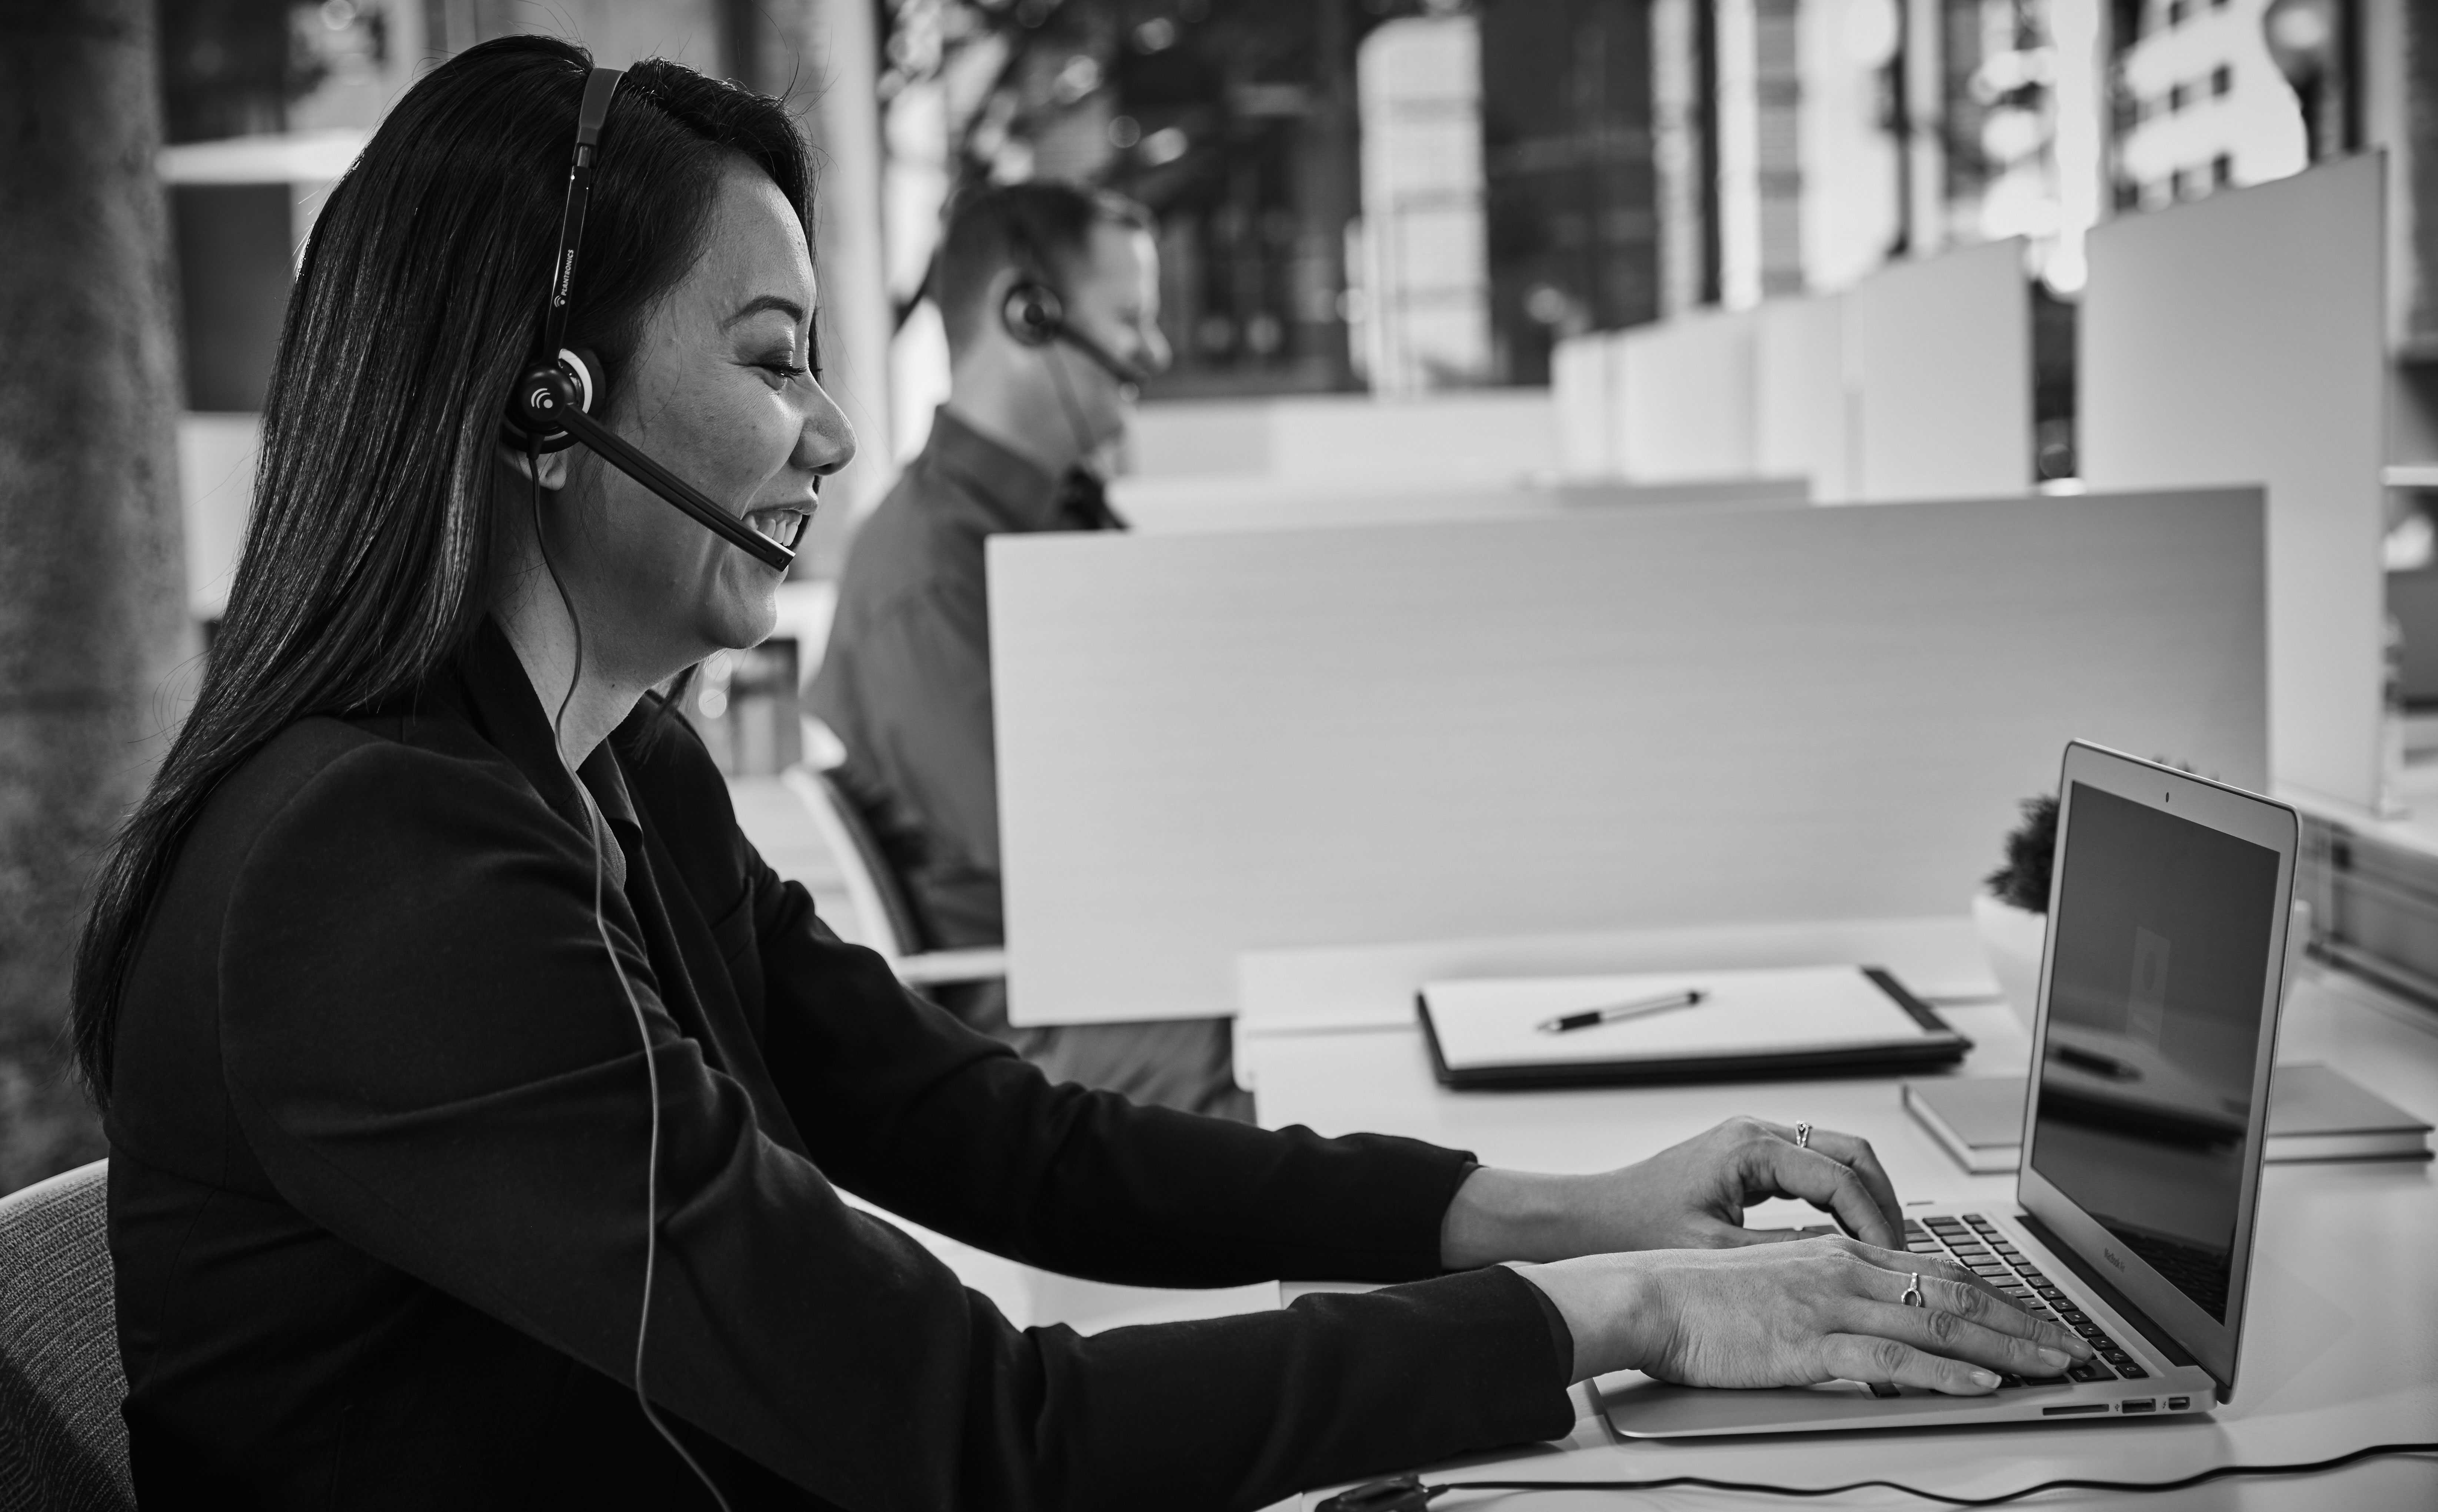 A customer service representative talks on a headset while typing at a computer